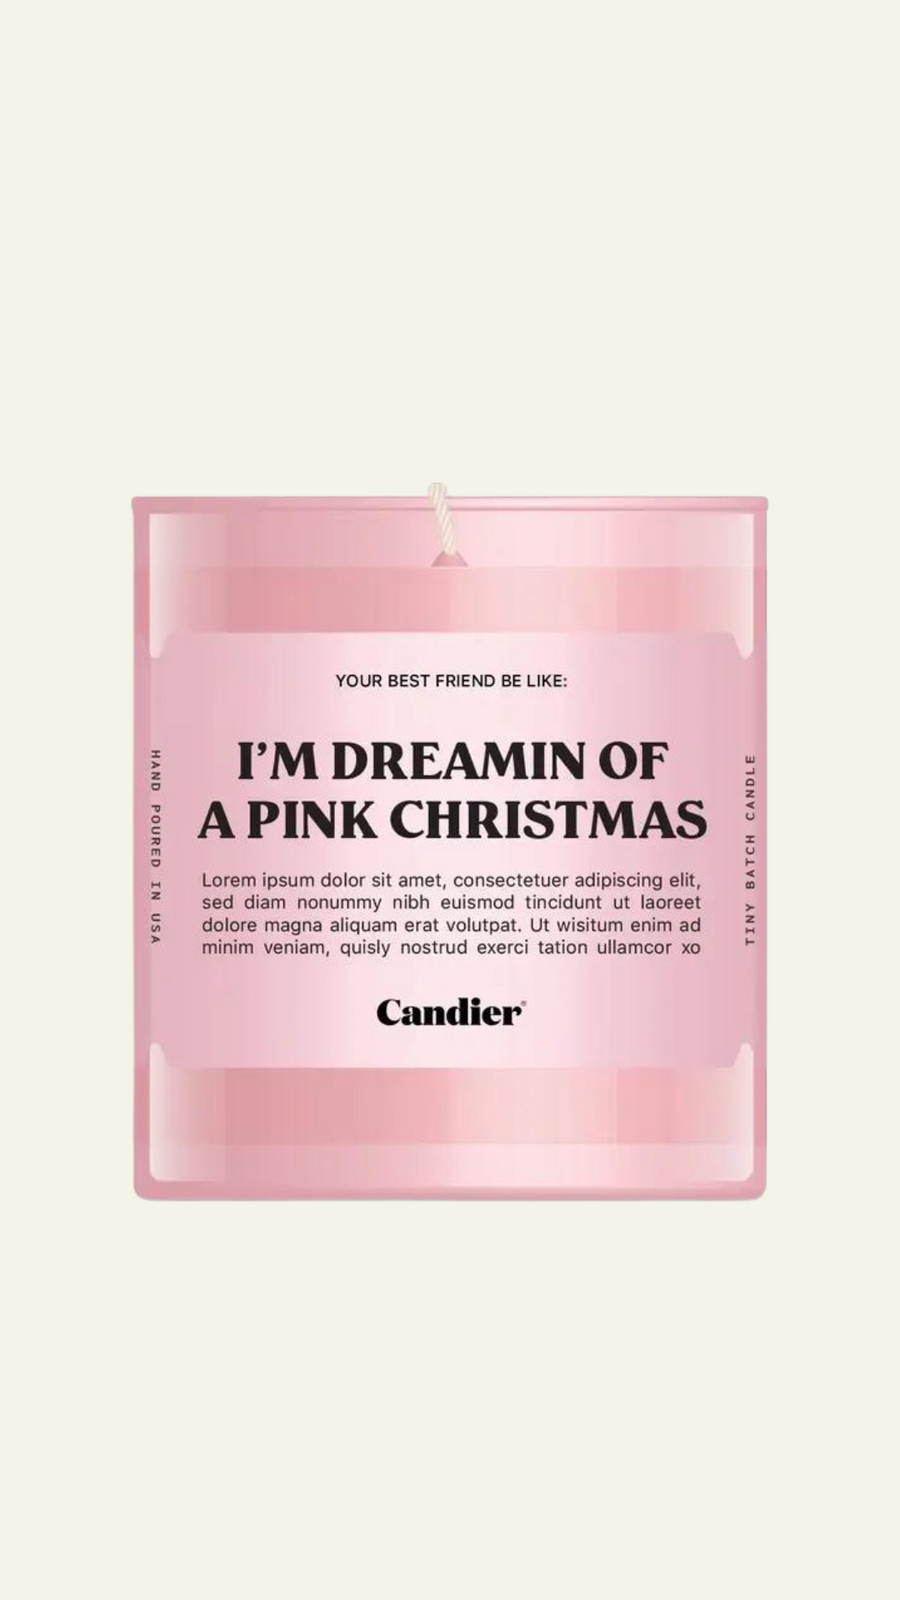 I’m Dreaming of a Pink Christmas Candle